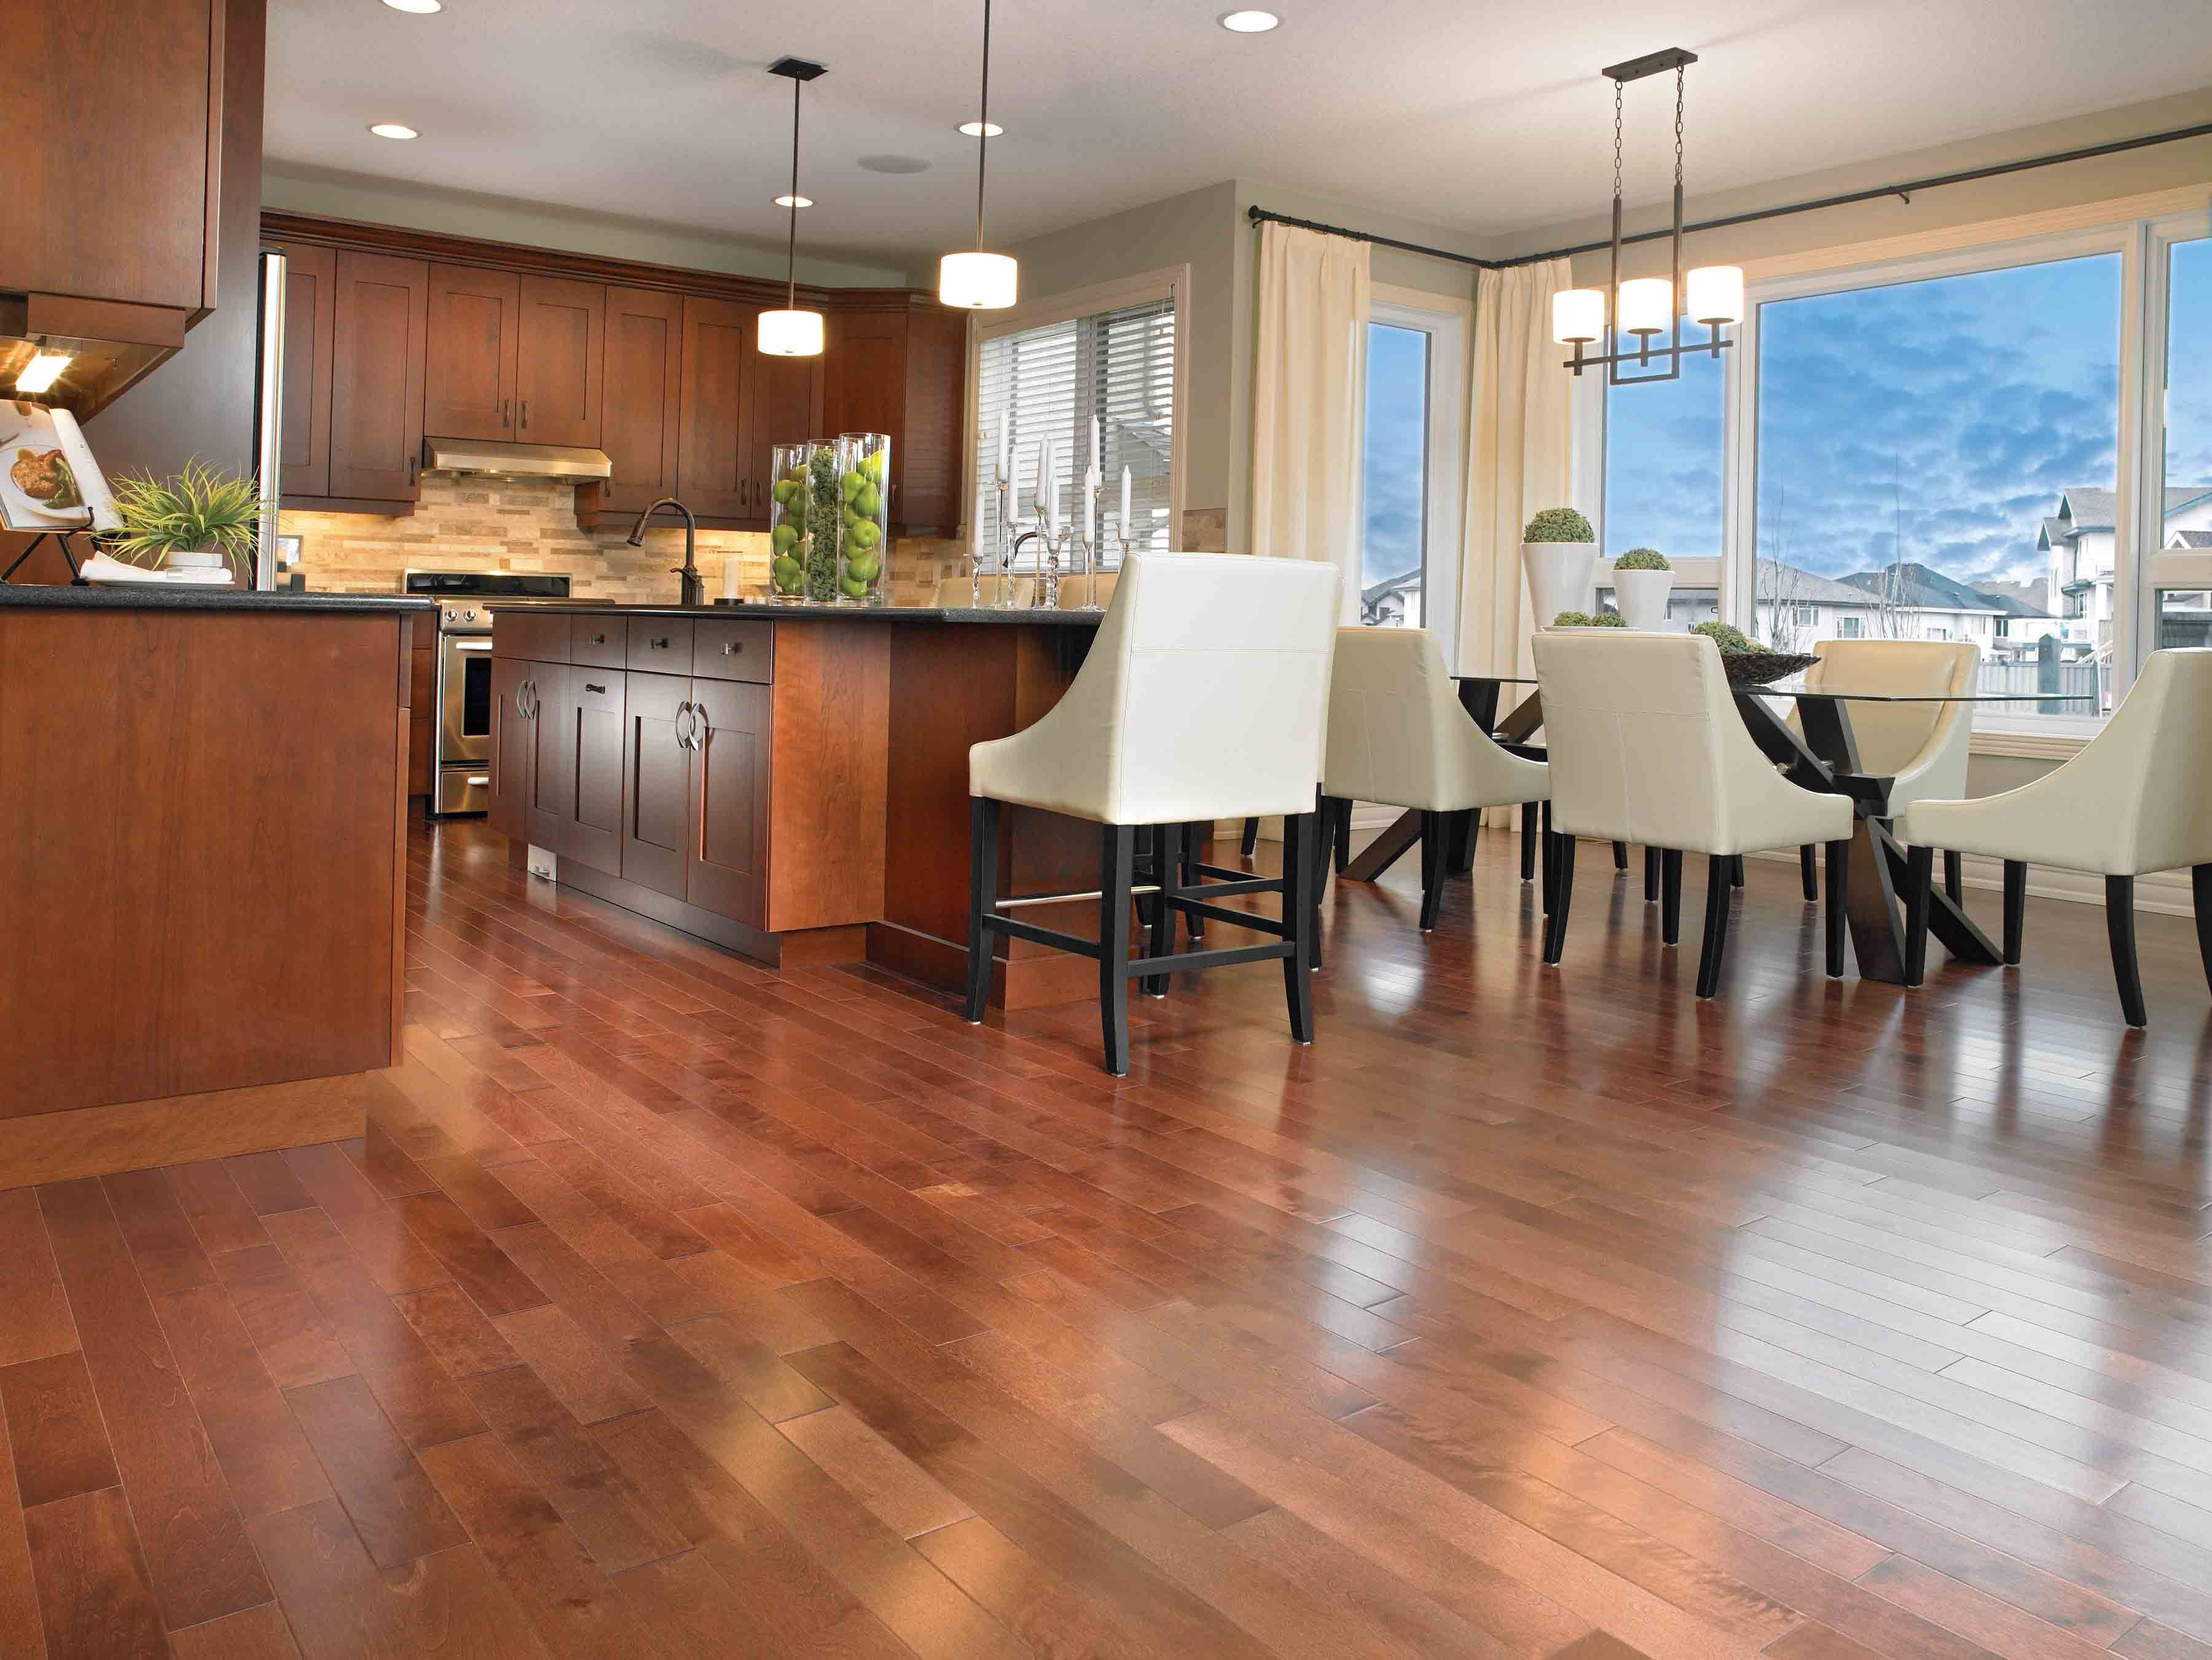 15 Best What Type Of Hardwood Floors are Best 2024 free download what type of hardwood floors are best of best plywood for flooring lovely how to resurface hardwood floors with regard to best plywood for flooring fresh 25 best prefinished hardwood floorin